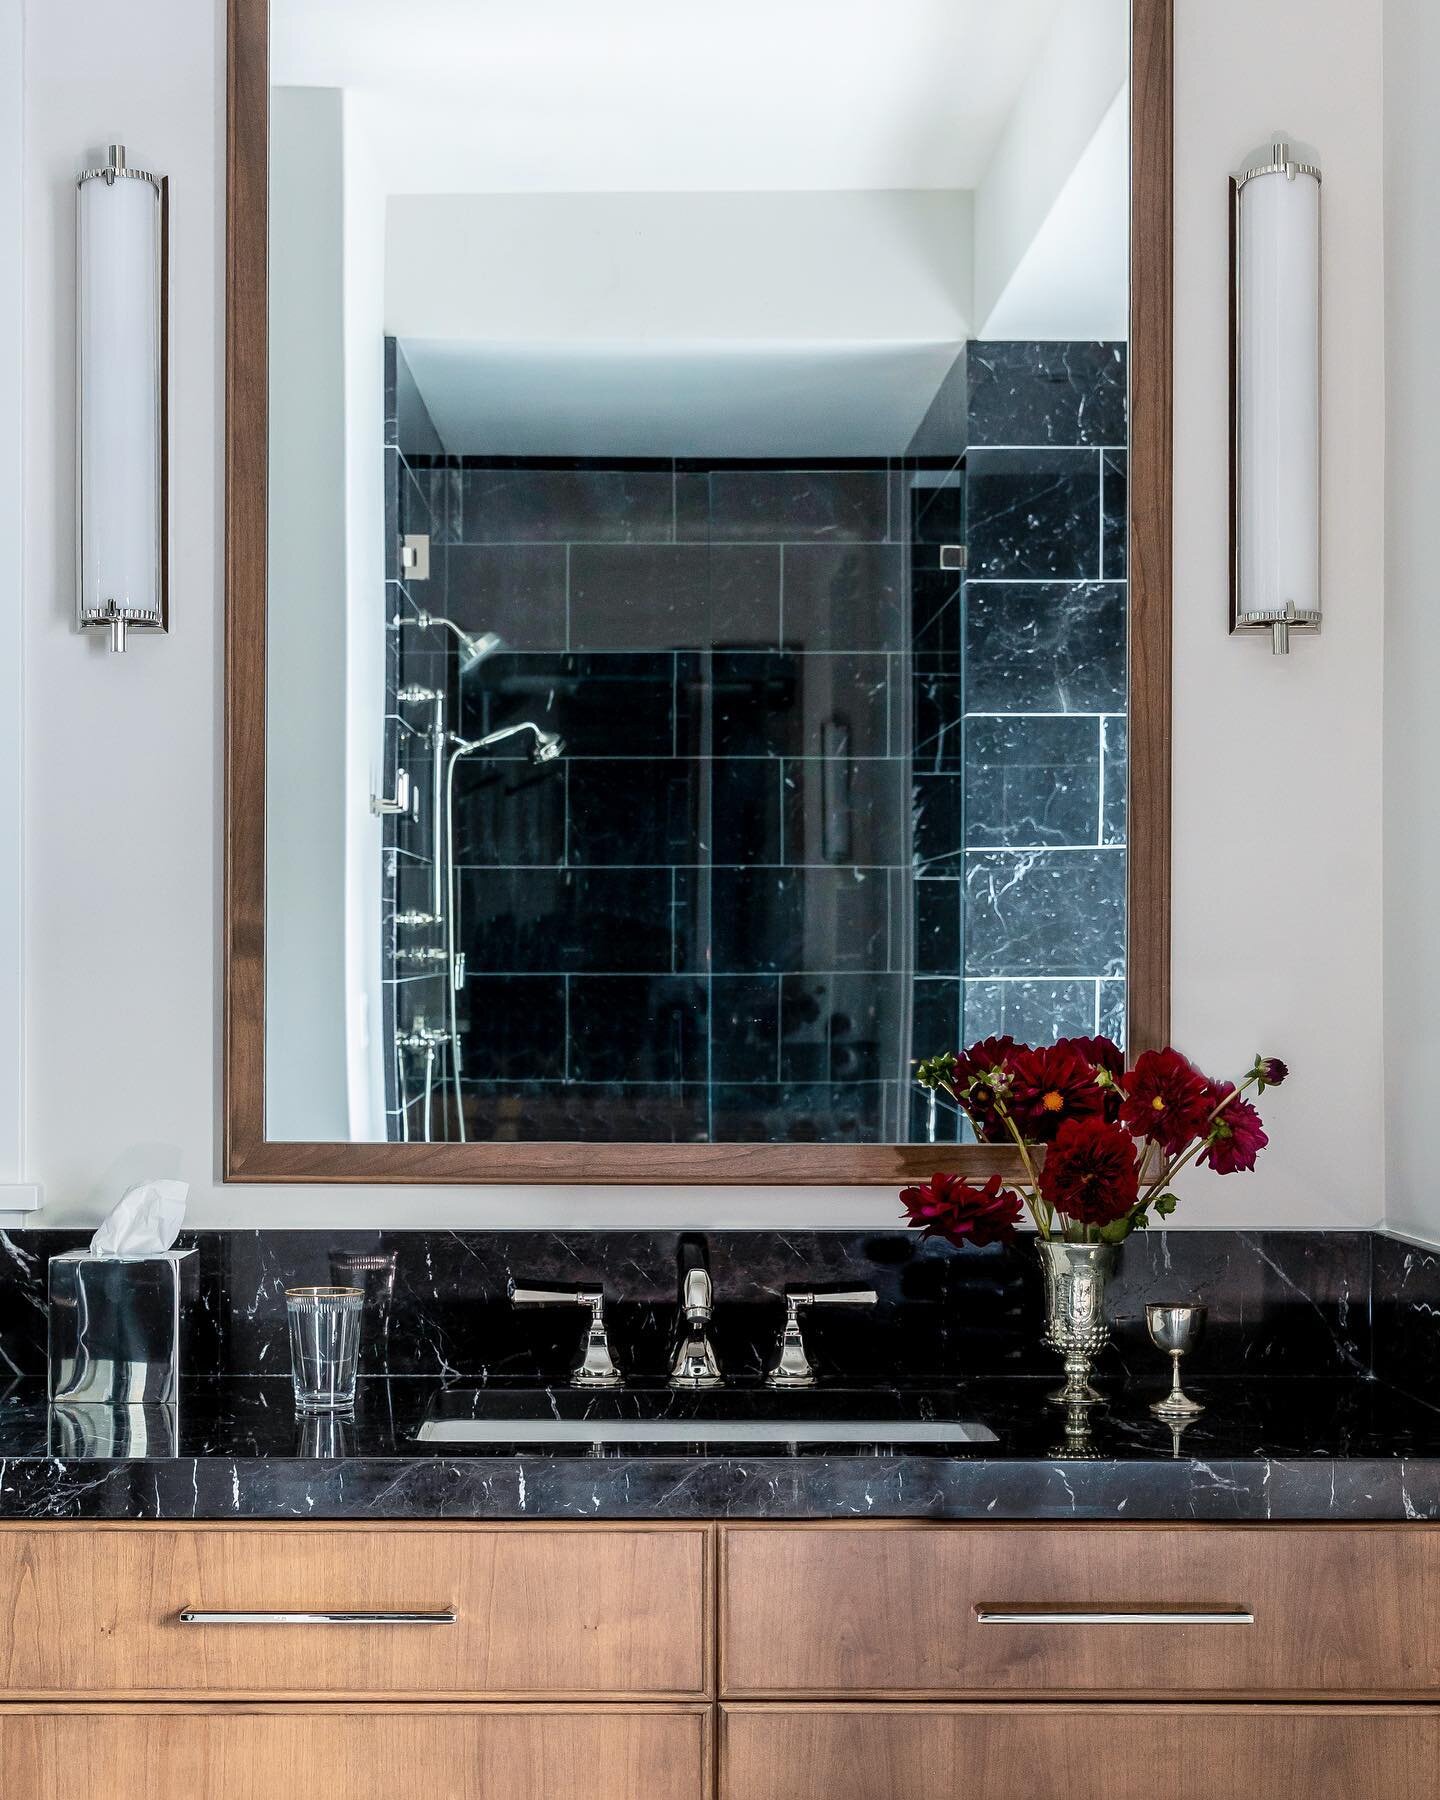 We&rsquo;re in love with the elegance of this Negro Marquina marble tempered by a classic oak stain. Polished nickel fixtures add a timeless final touch to this Owner&rsquo;s bath✨
.
.
.
.
.
.
.
.
Design: @suzanne_mcaleer 
Styled: @noellewrightstyles